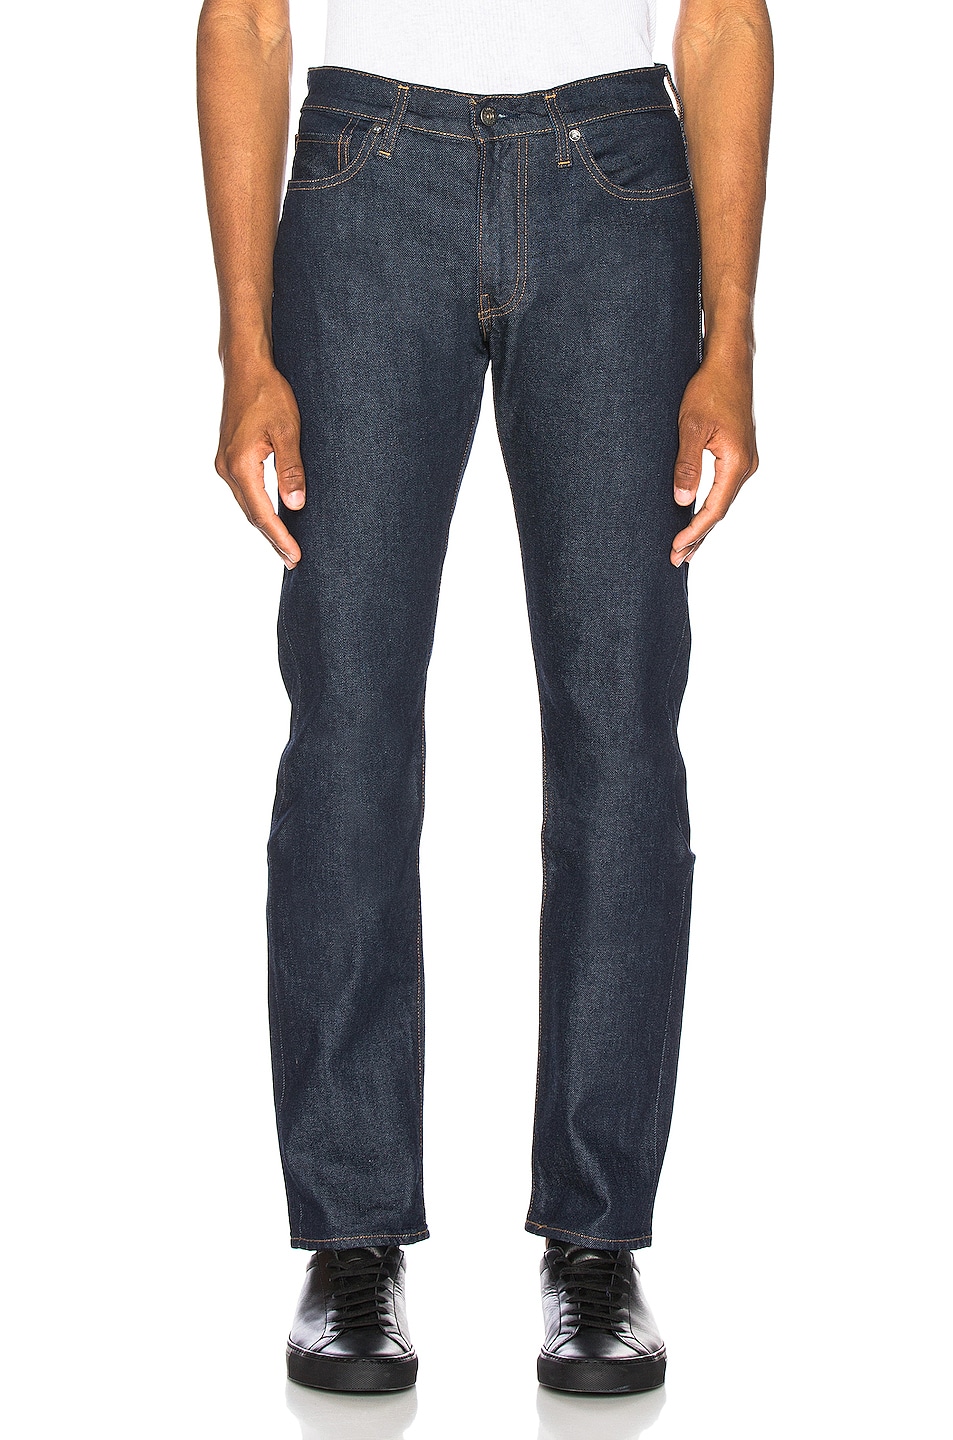 Image 1 of LEVI'S: Made & Crafted 511 Slim Jean in Resin Rinse